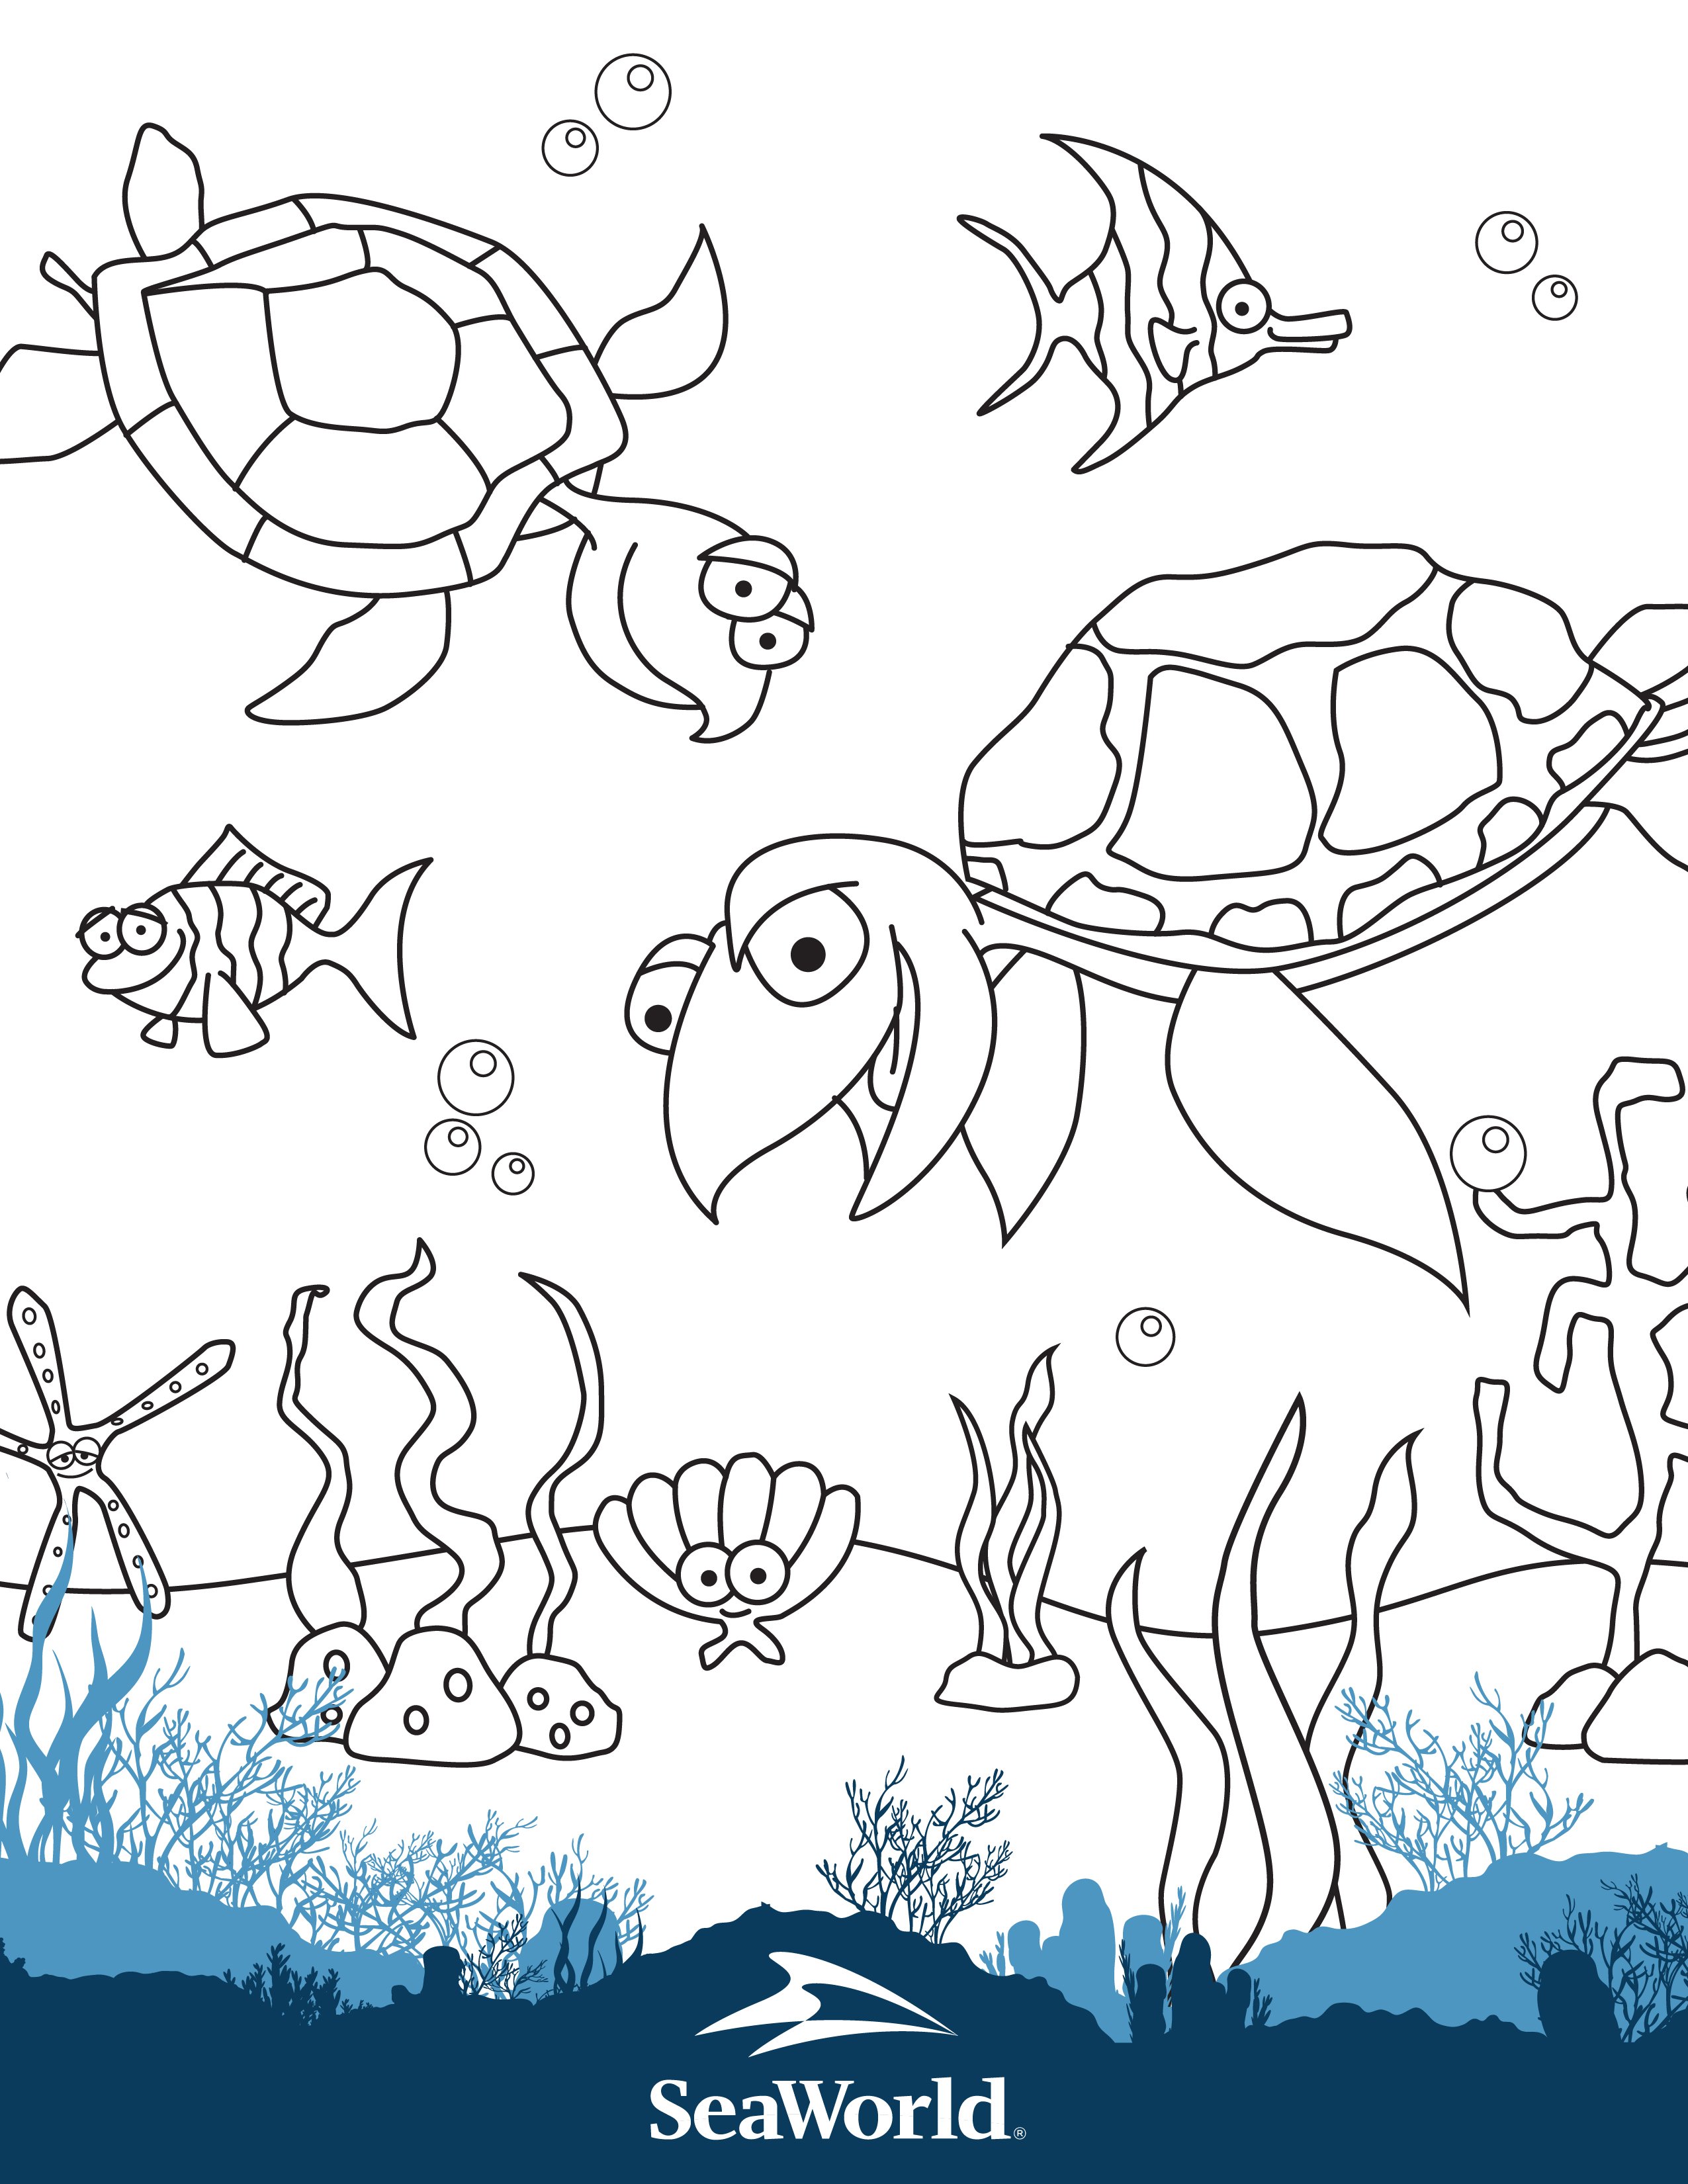 Coloring Pages & Games | SeaWorld